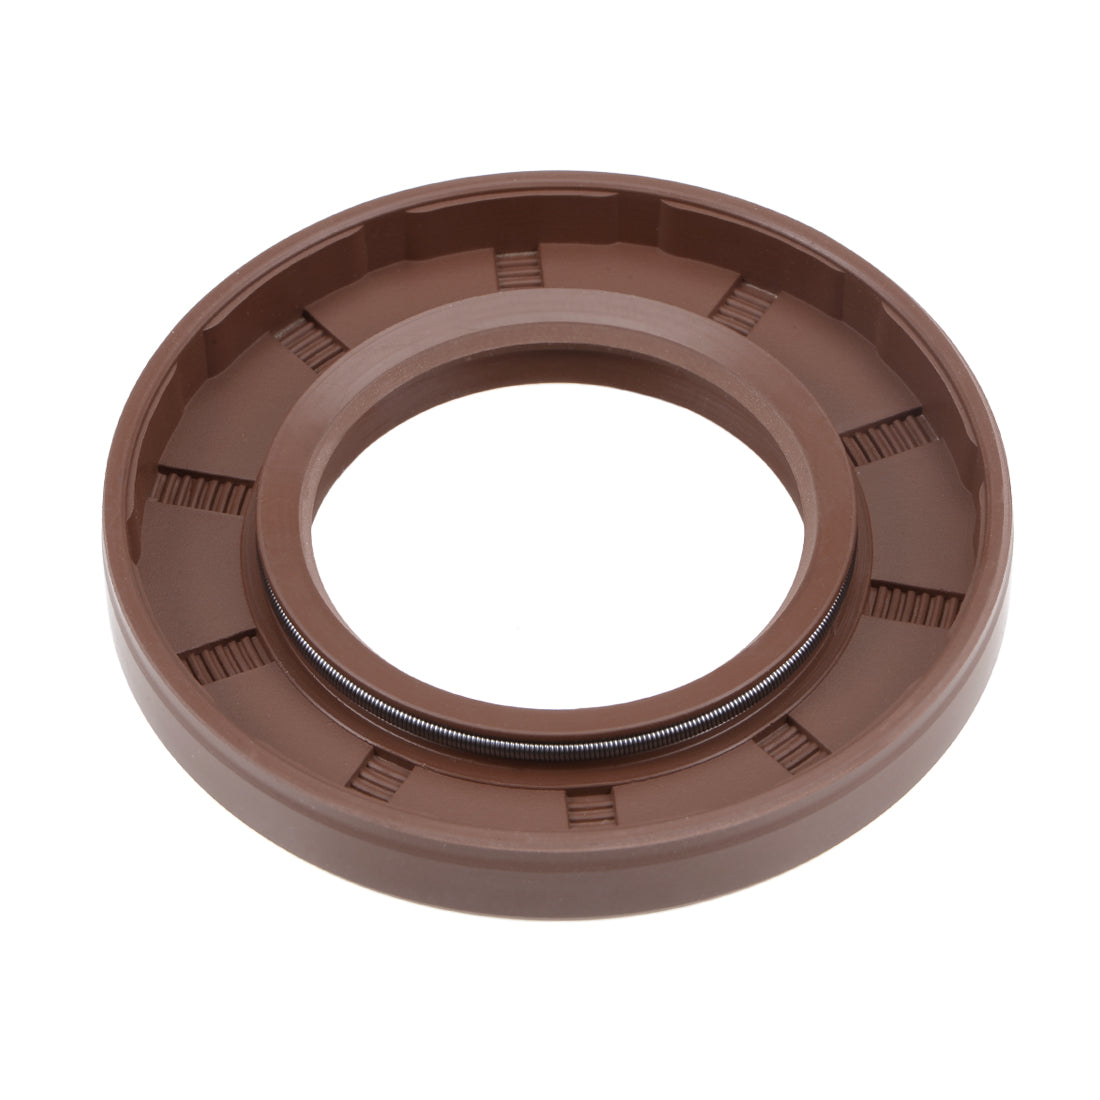 uxcell Uxcell Oil Seal 35mm Inner Dia 62mm OD 8mm Thick Fluorine Rubber Double Lip Seals 2Pcs